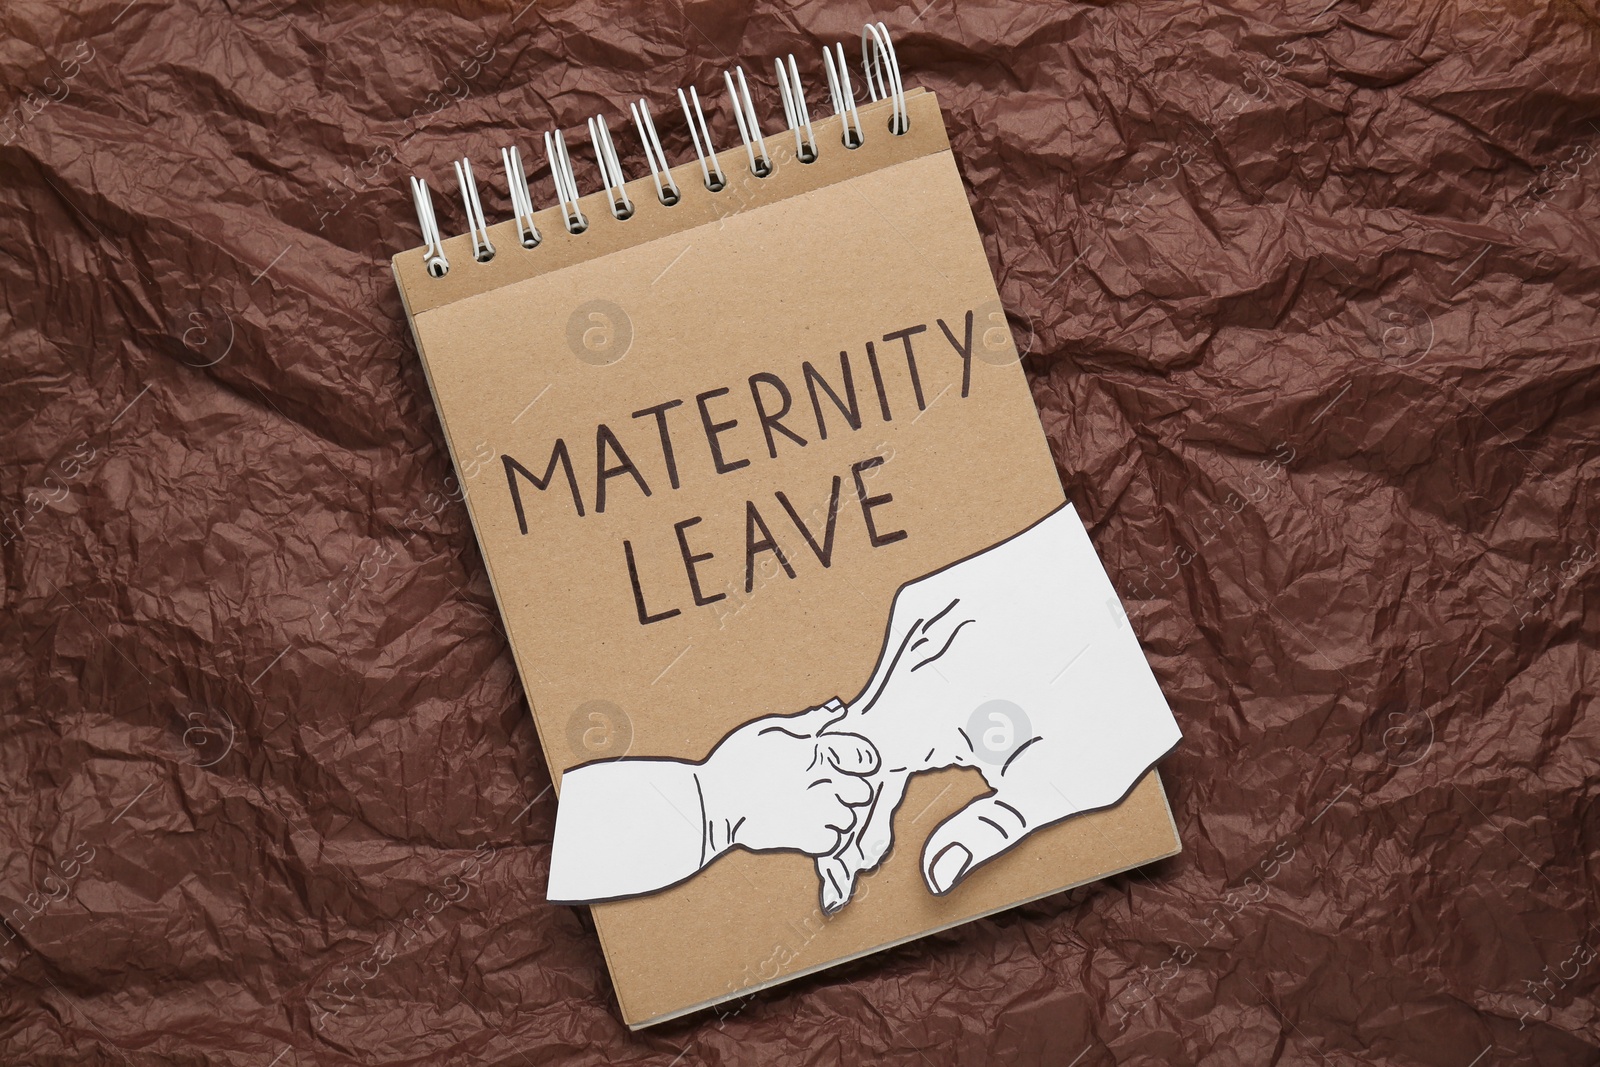 Photo of Notepad with words Maternity Leave and cutout of hands on brown crumpled paper, top view